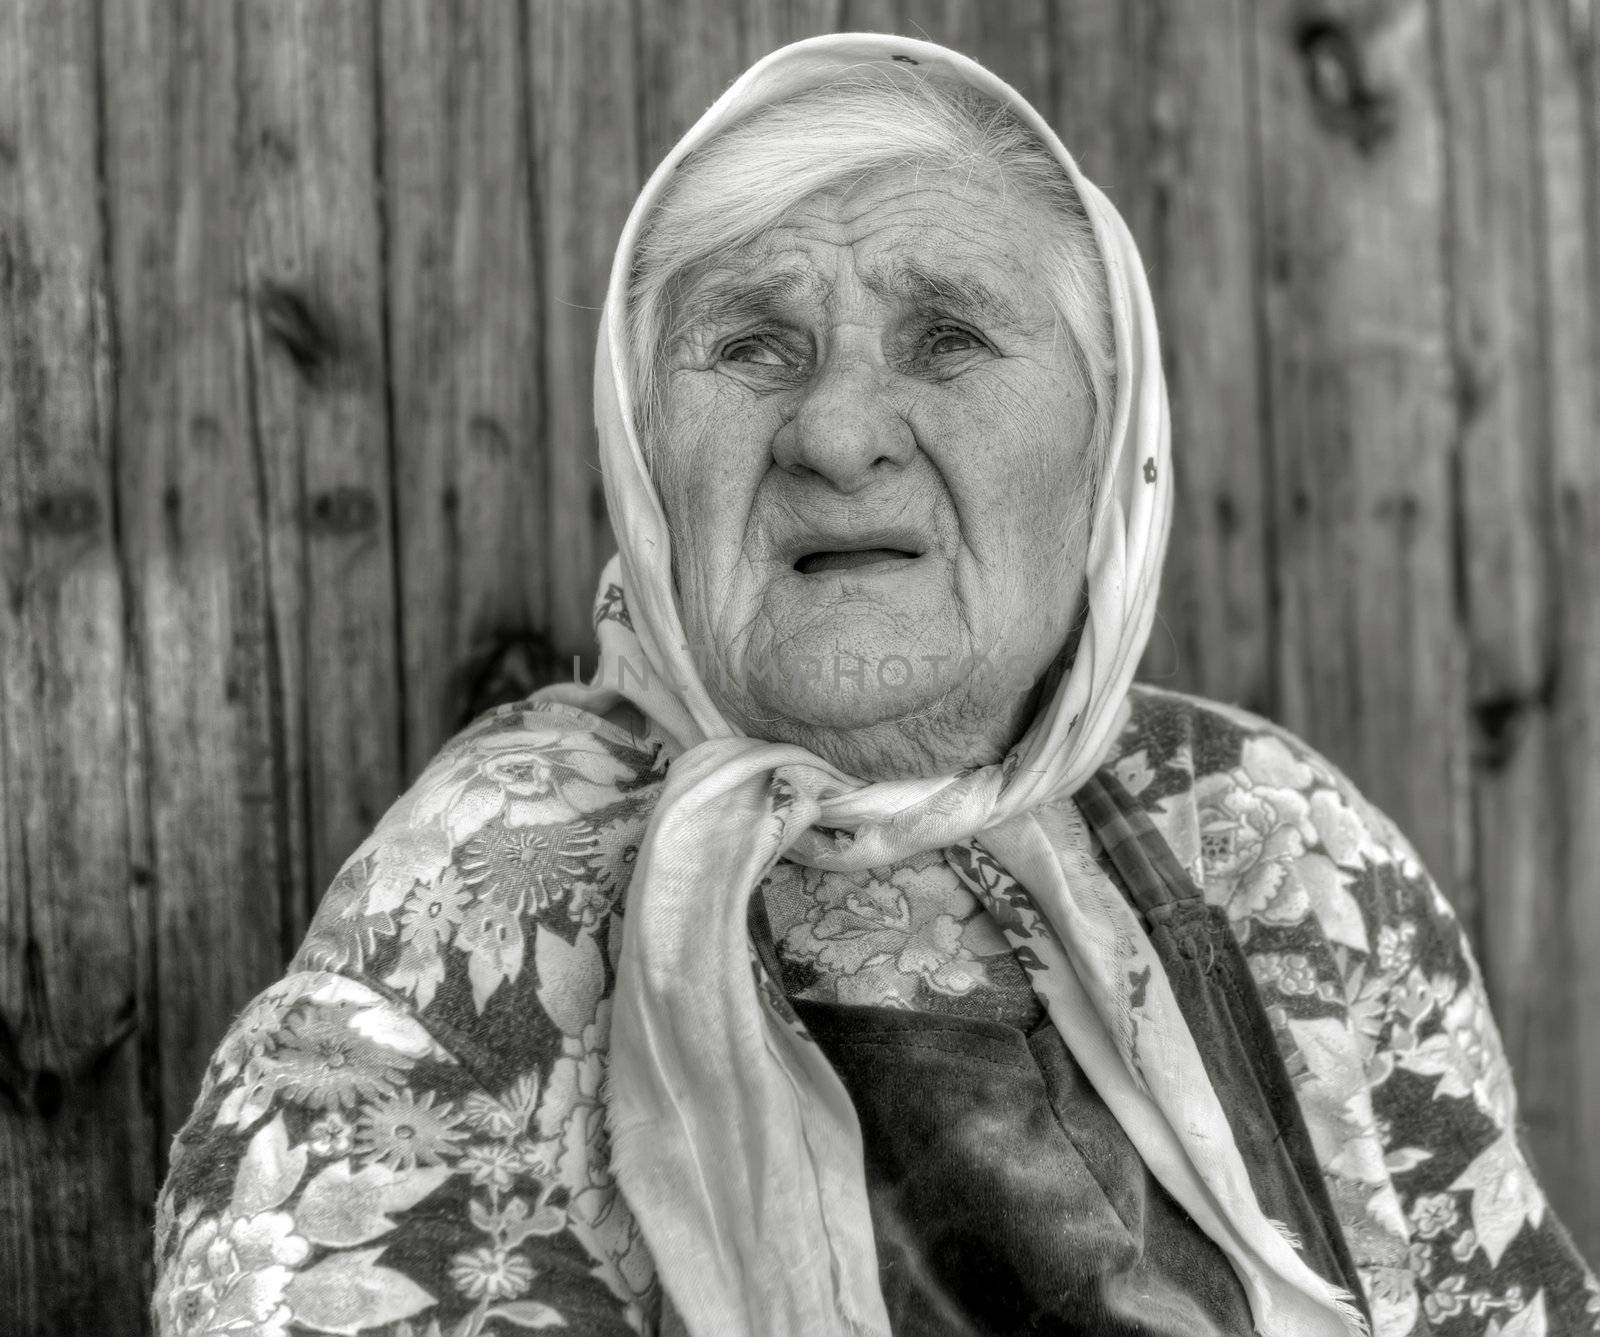 The old woman age 84 years. Sadness emotion